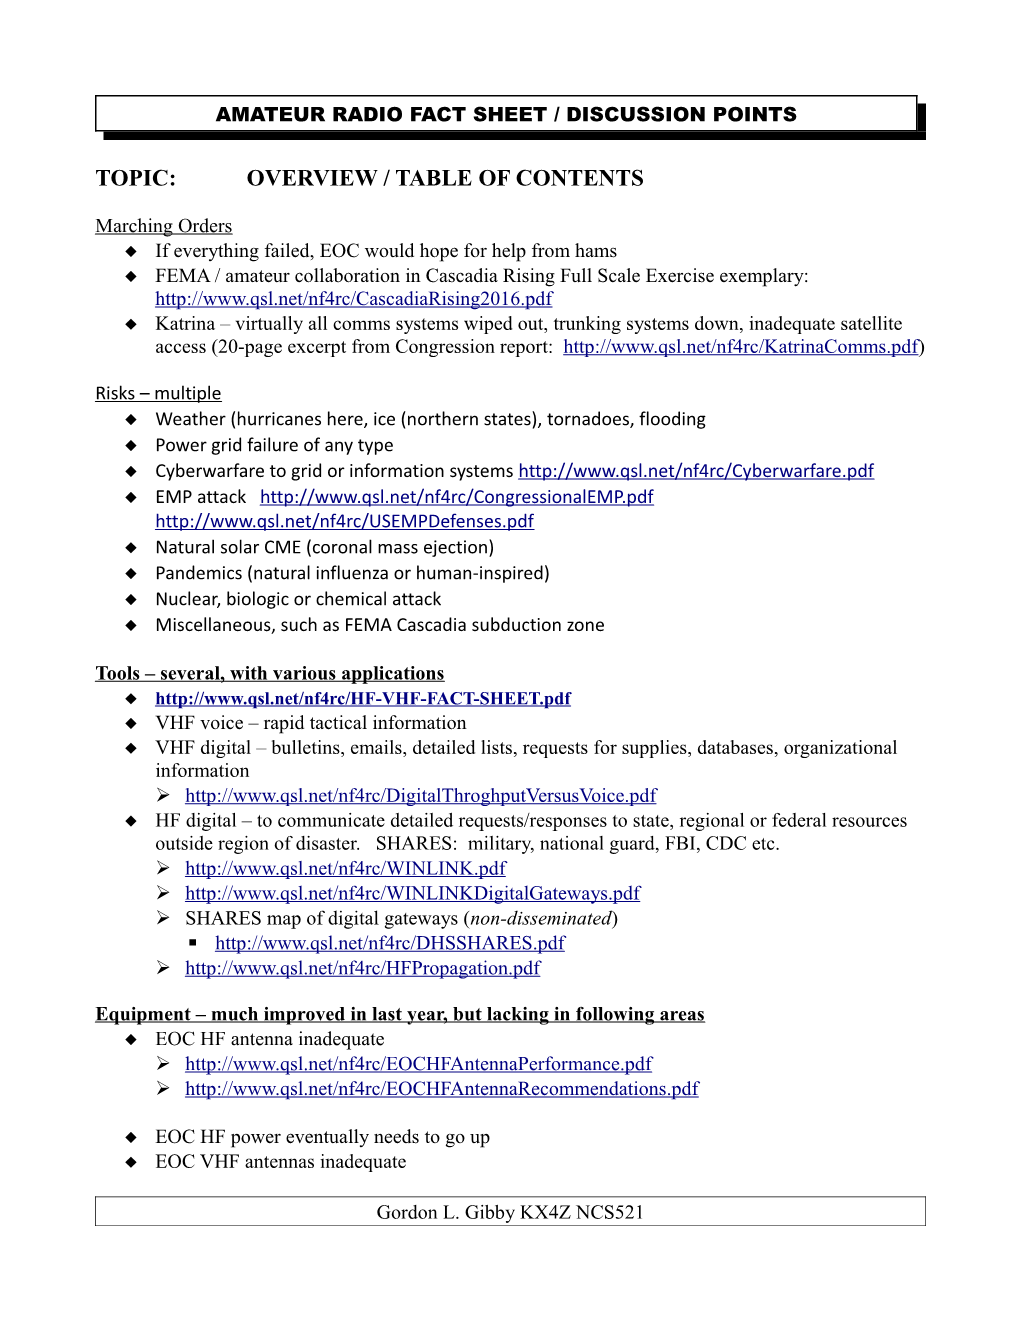 Overview / Table of Contents